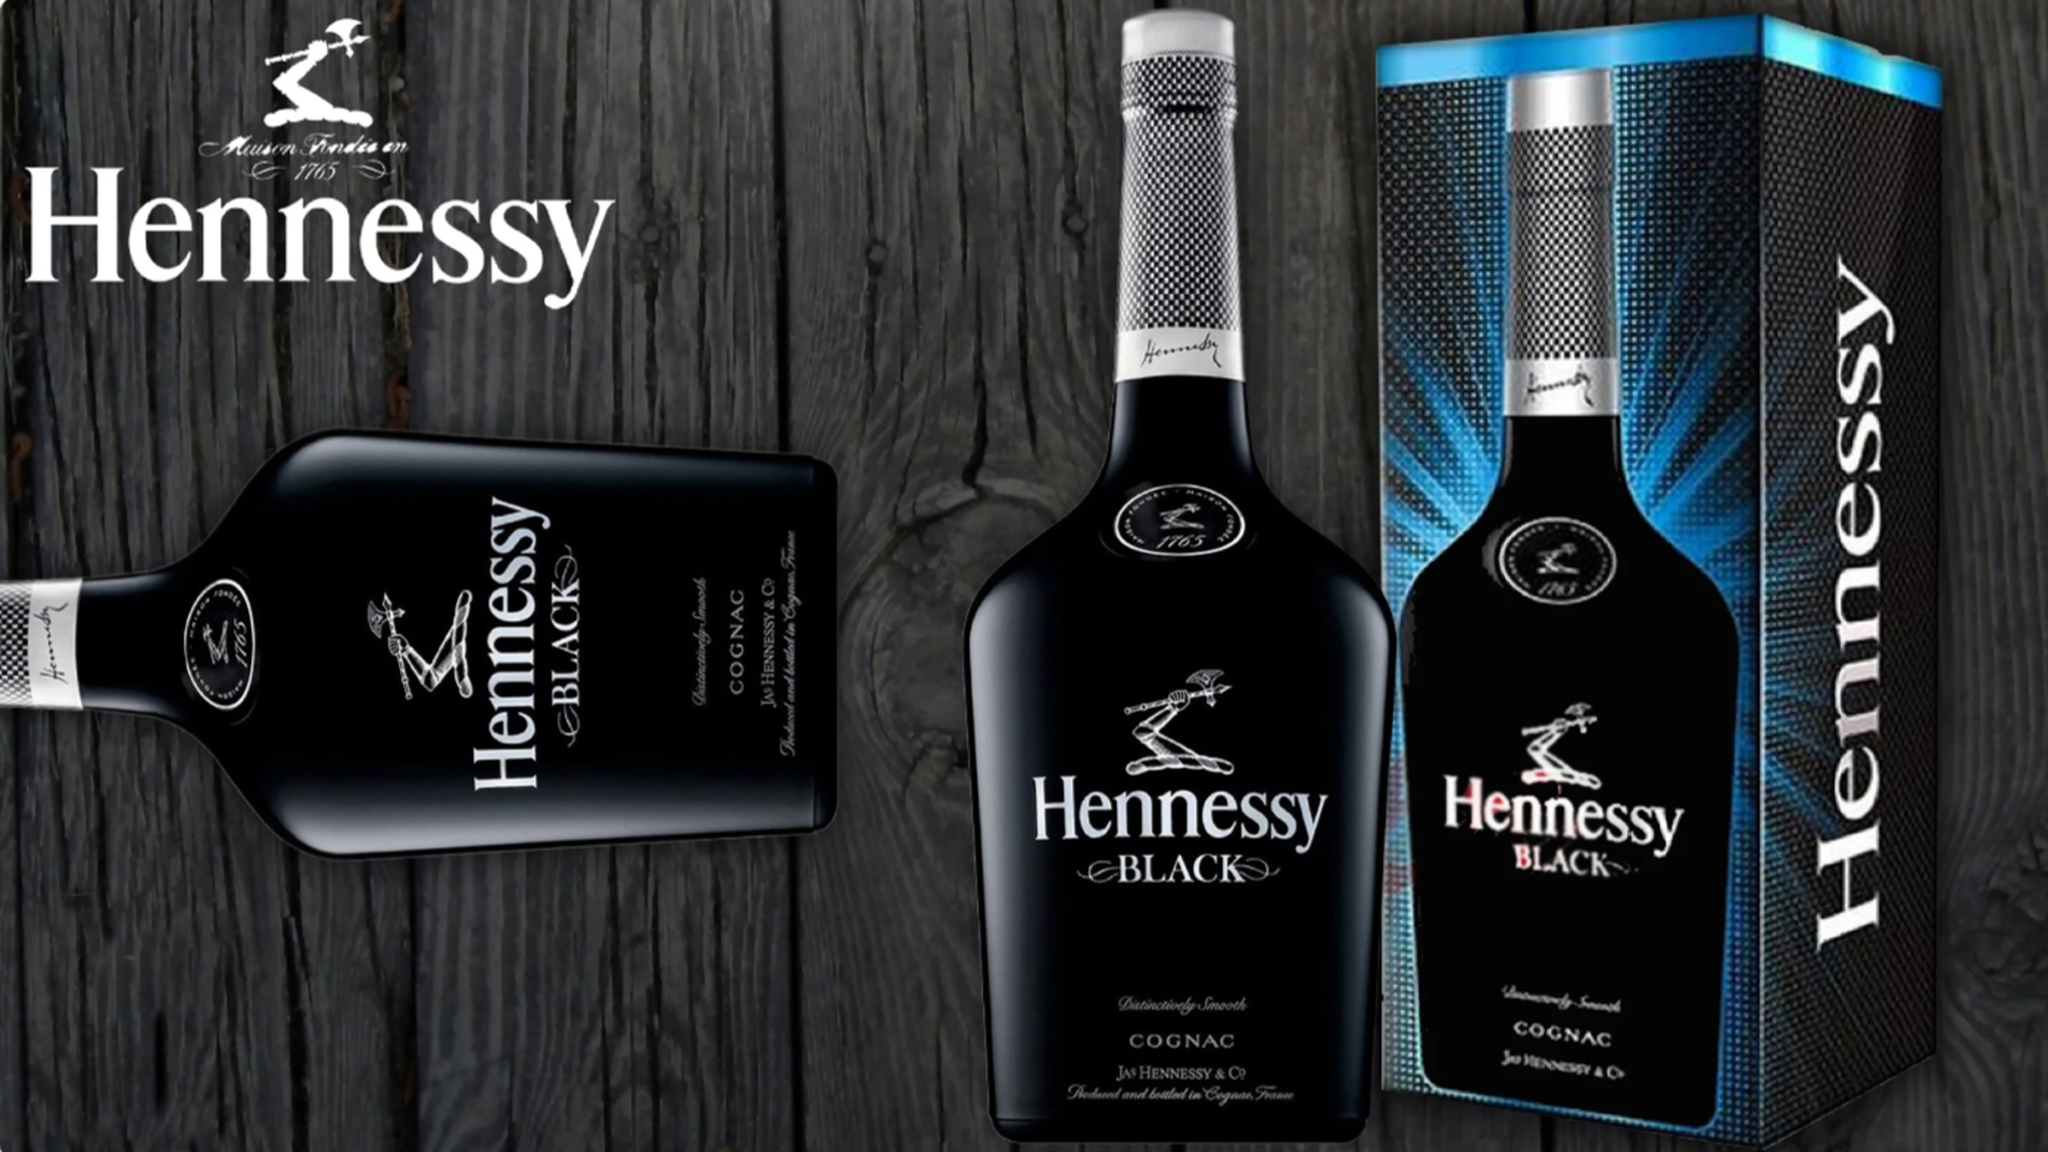 White cognac, black cognac and cognac in a suitcase. And it's all Hennessy - My, Cognac, Longpost, Hennessy